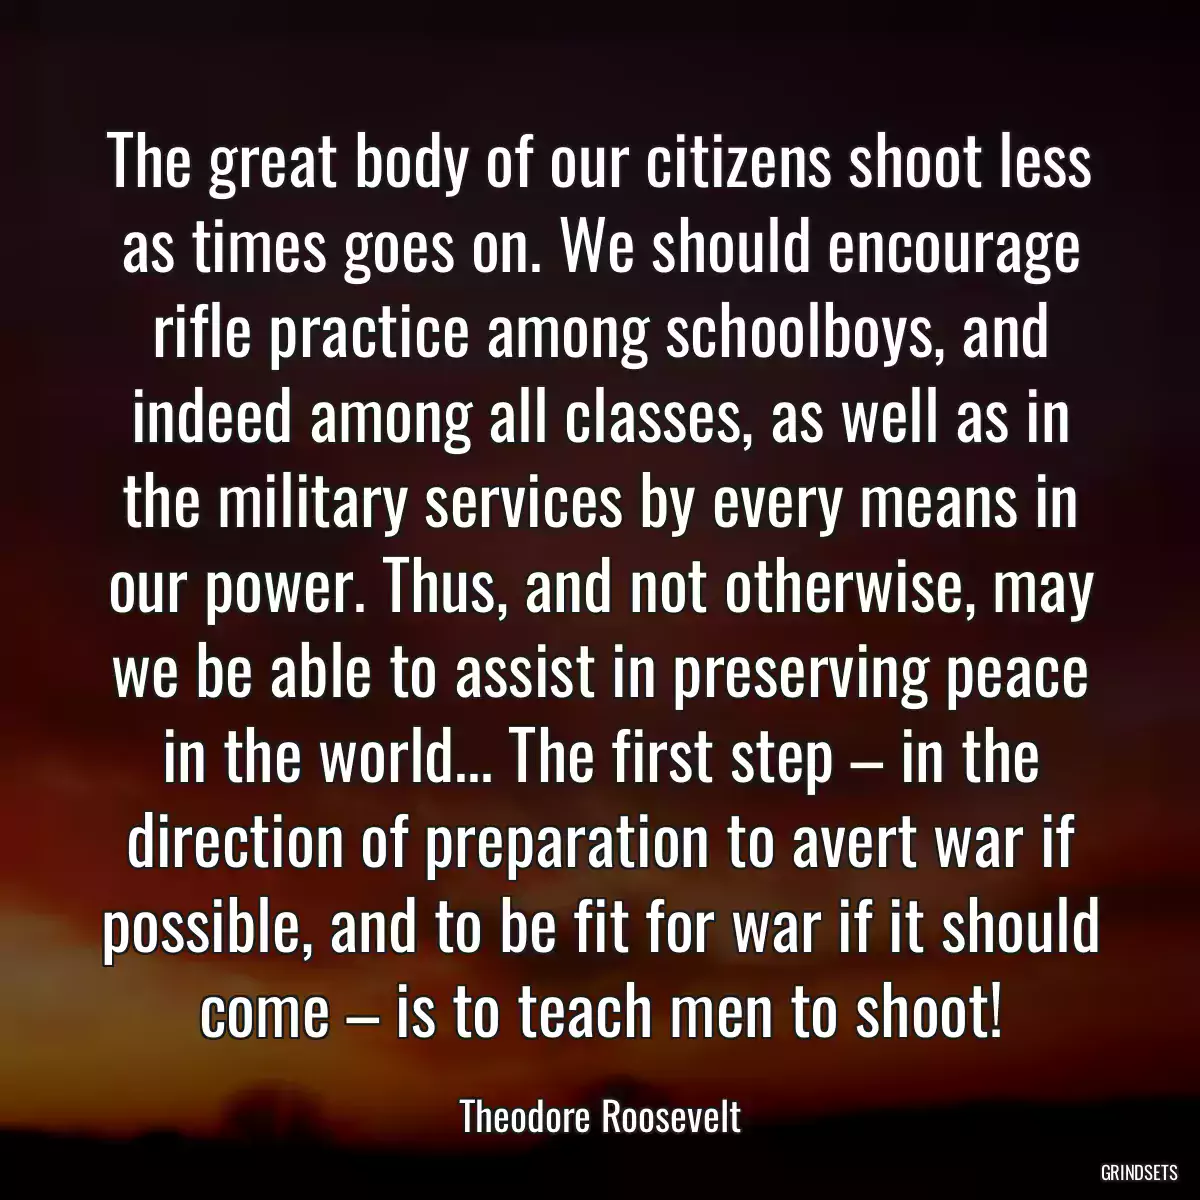 The great body of our citizens shoot less as times goes on. We should encourage rifle practice among schoolboys, and indeed among all classes, as well as in the military services by every means in our power. Thus, and not otherwise, may we be able to assist in preserving peace in the world... The first step – in the direction of preparation to avert war if possible, and to be fit for war if it should come – is to teach men to shoot!